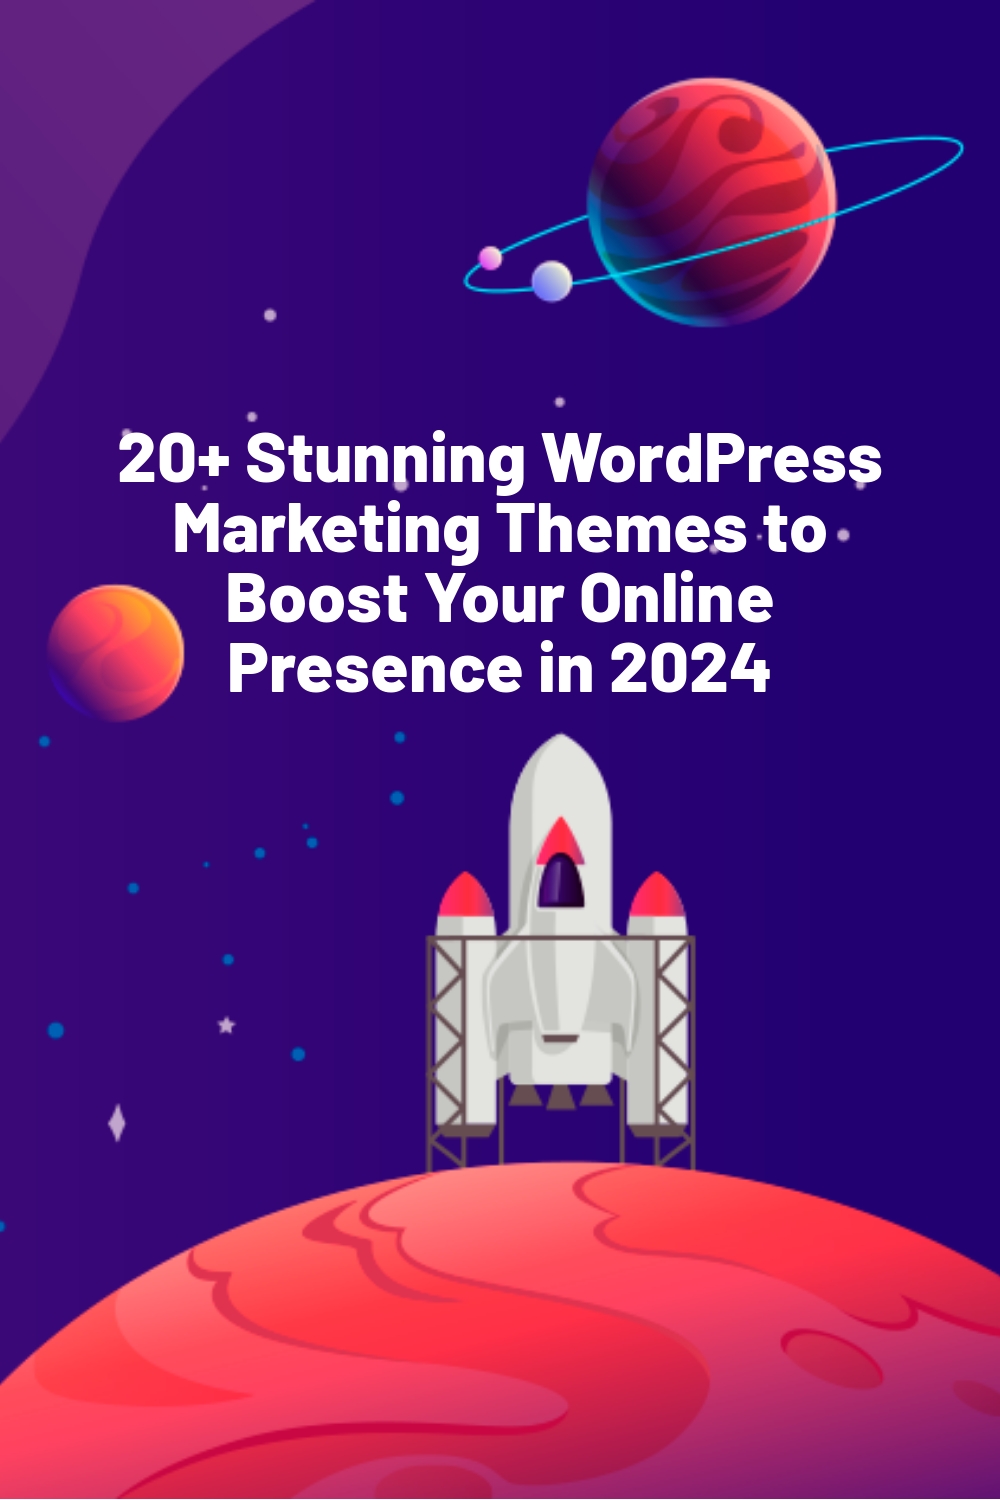 20+ Stunning WordPress Marketing Themes to Boost Your Online Presence in 2024